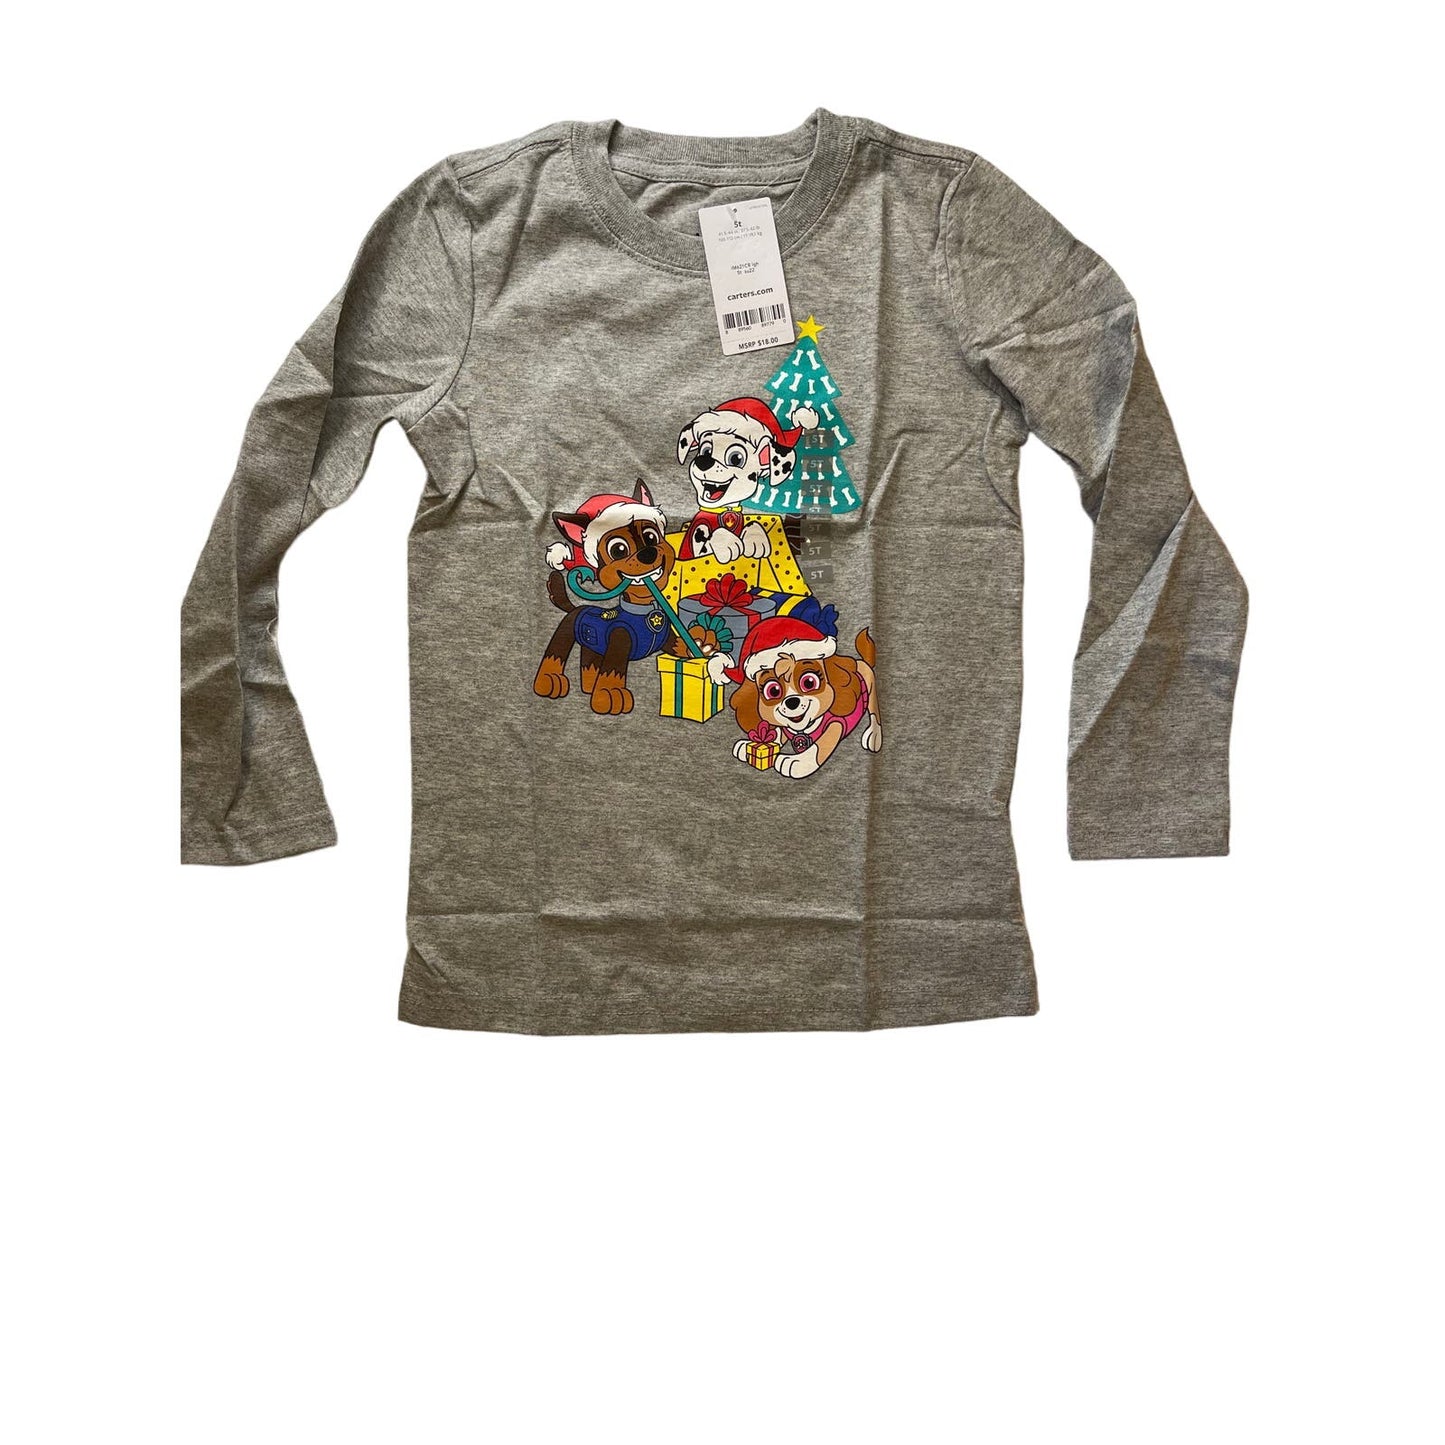 NWT Carters Size 5T Children's Paw Patrol Holiday Christmas Long Sleeve Shirt